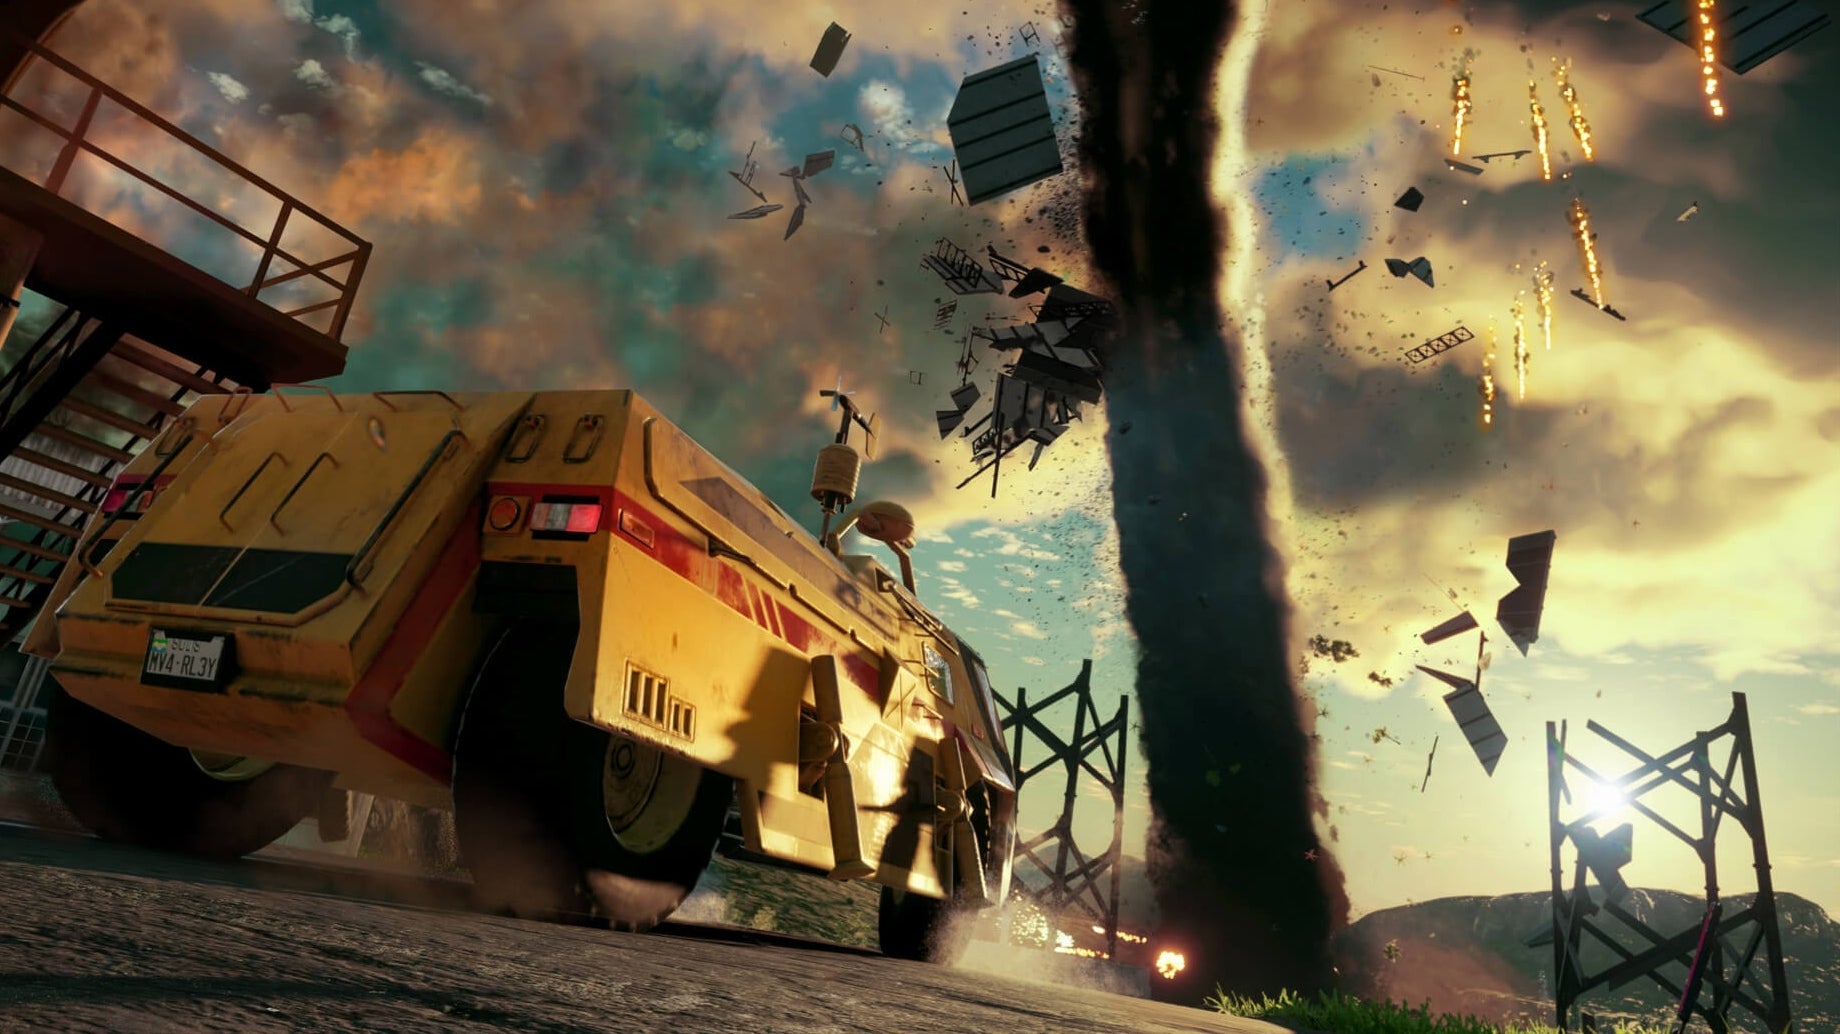 Image for Just Cause 4's latest gameplay video shows off chaotic tornado action